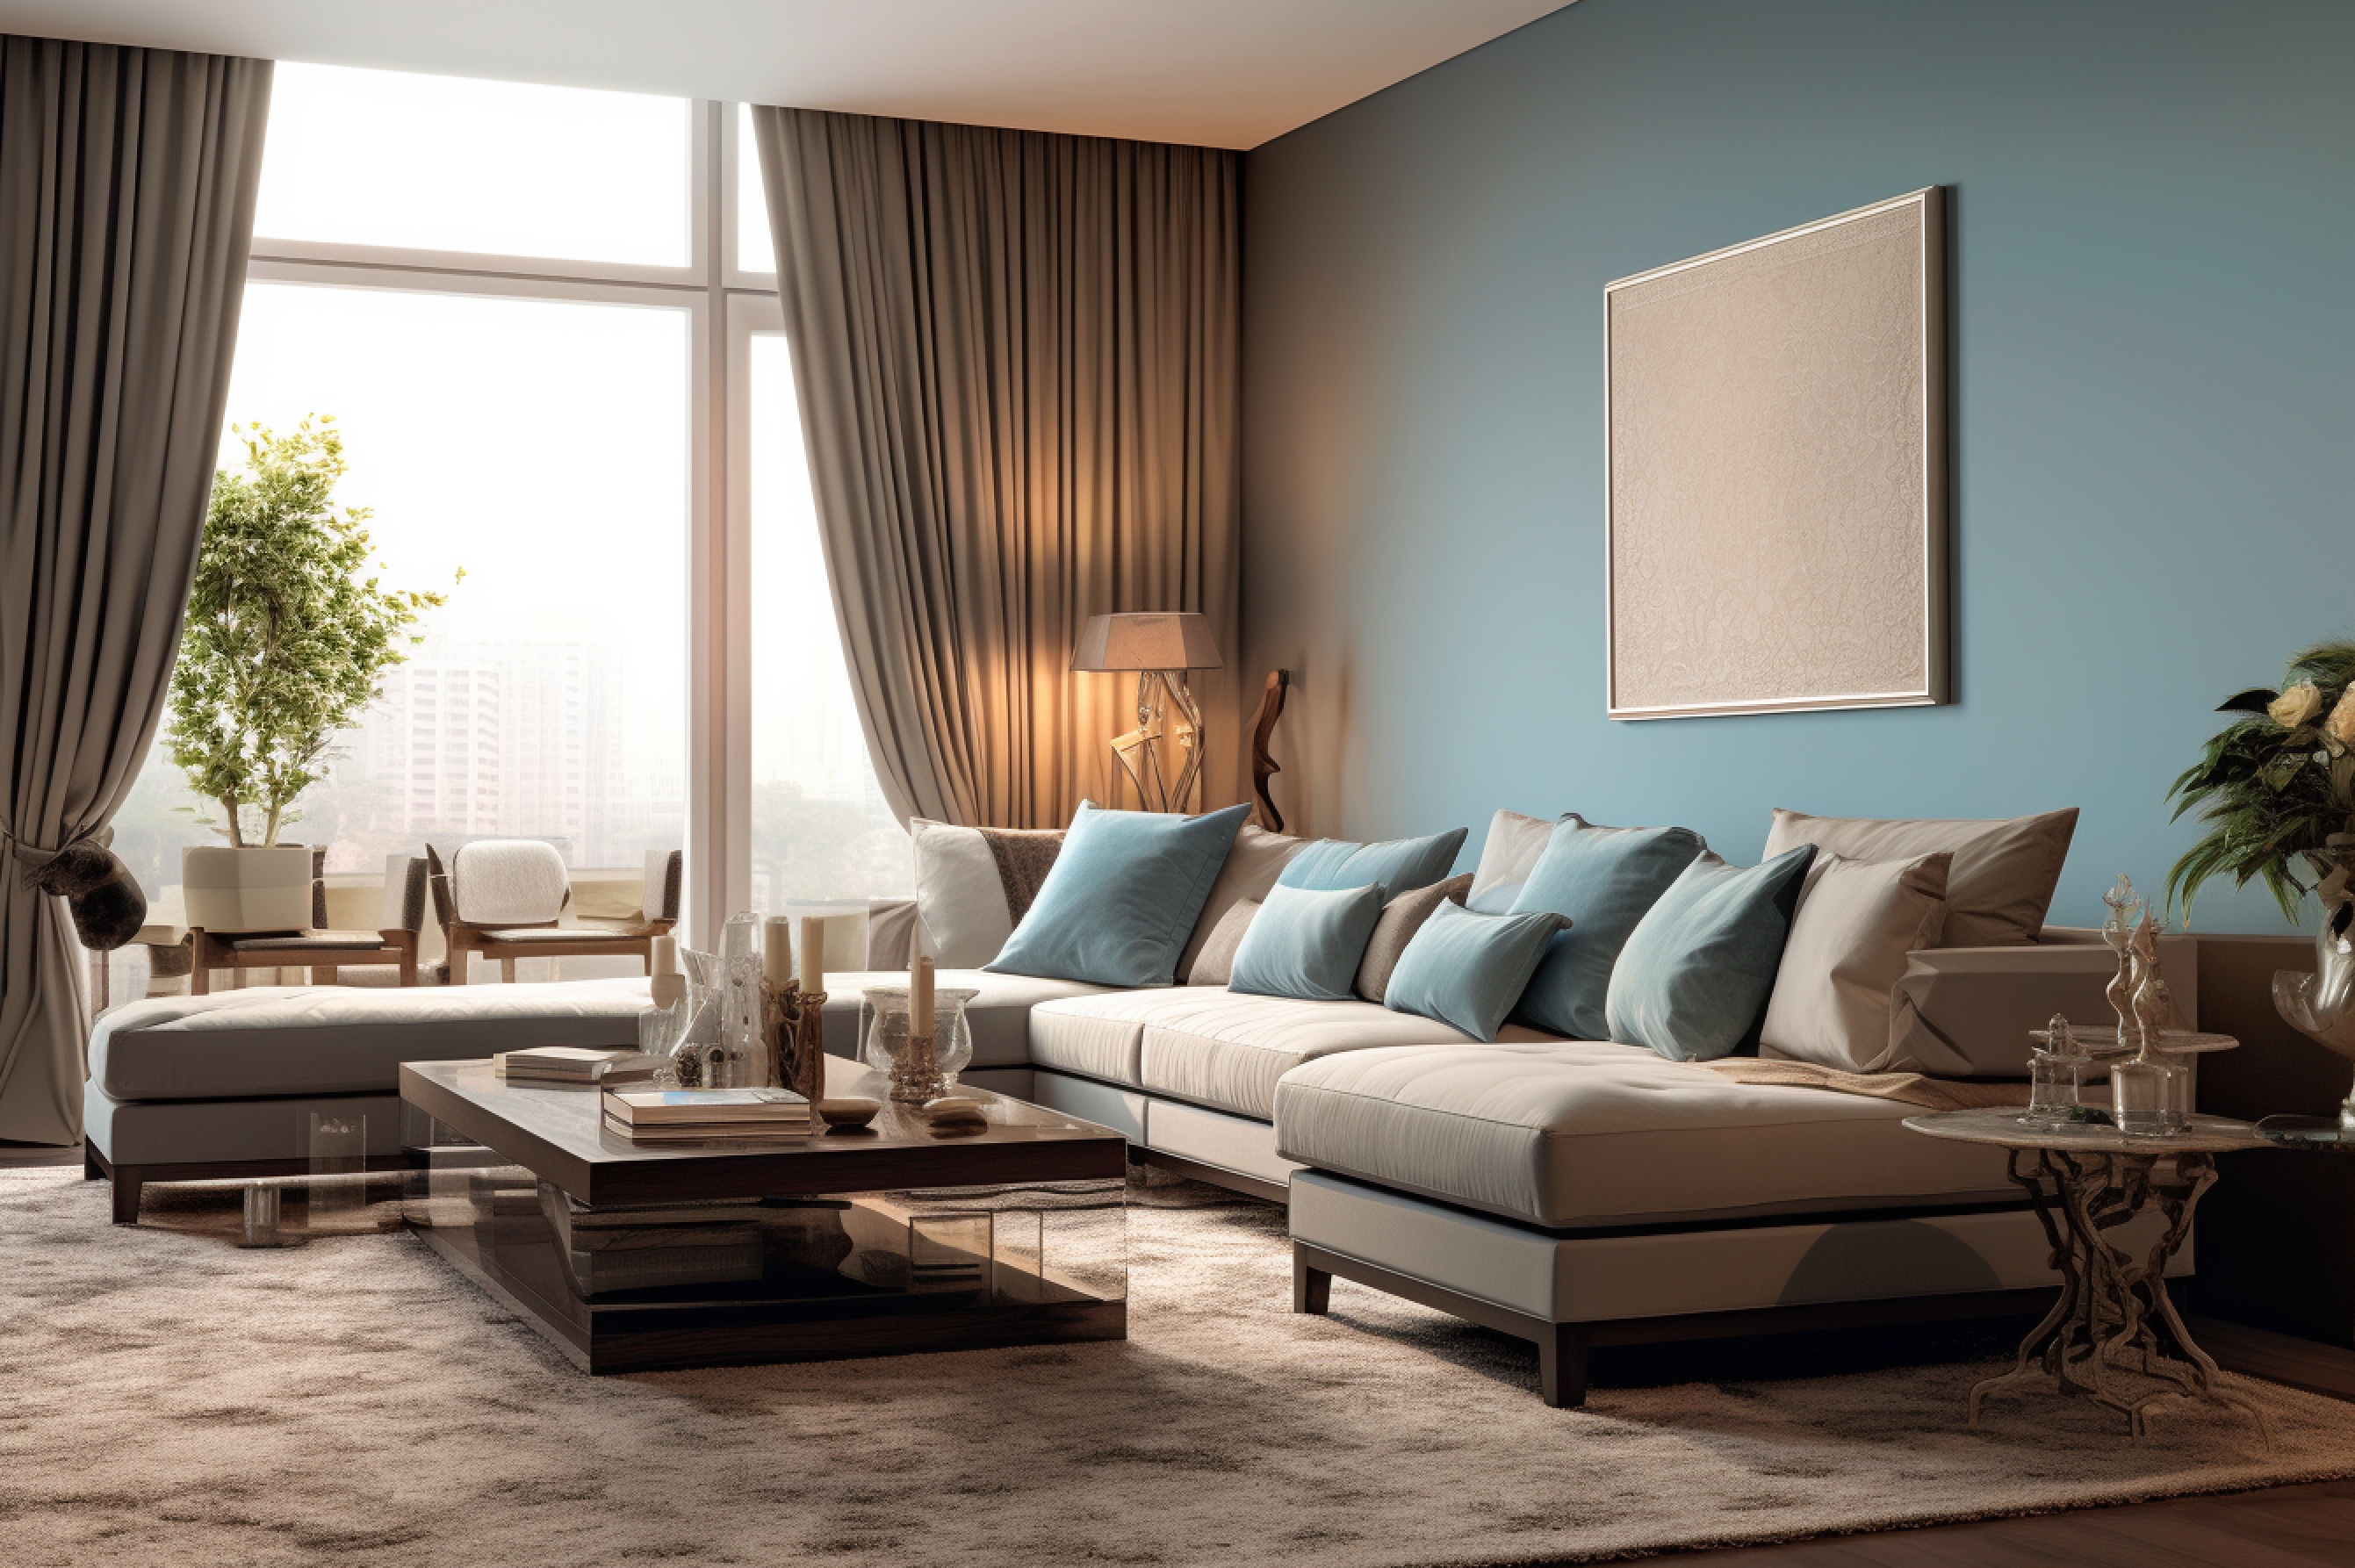 Image of an elegant living room with a brown aesthetic and touches of pale blue in cushions, rugs, and wall art.